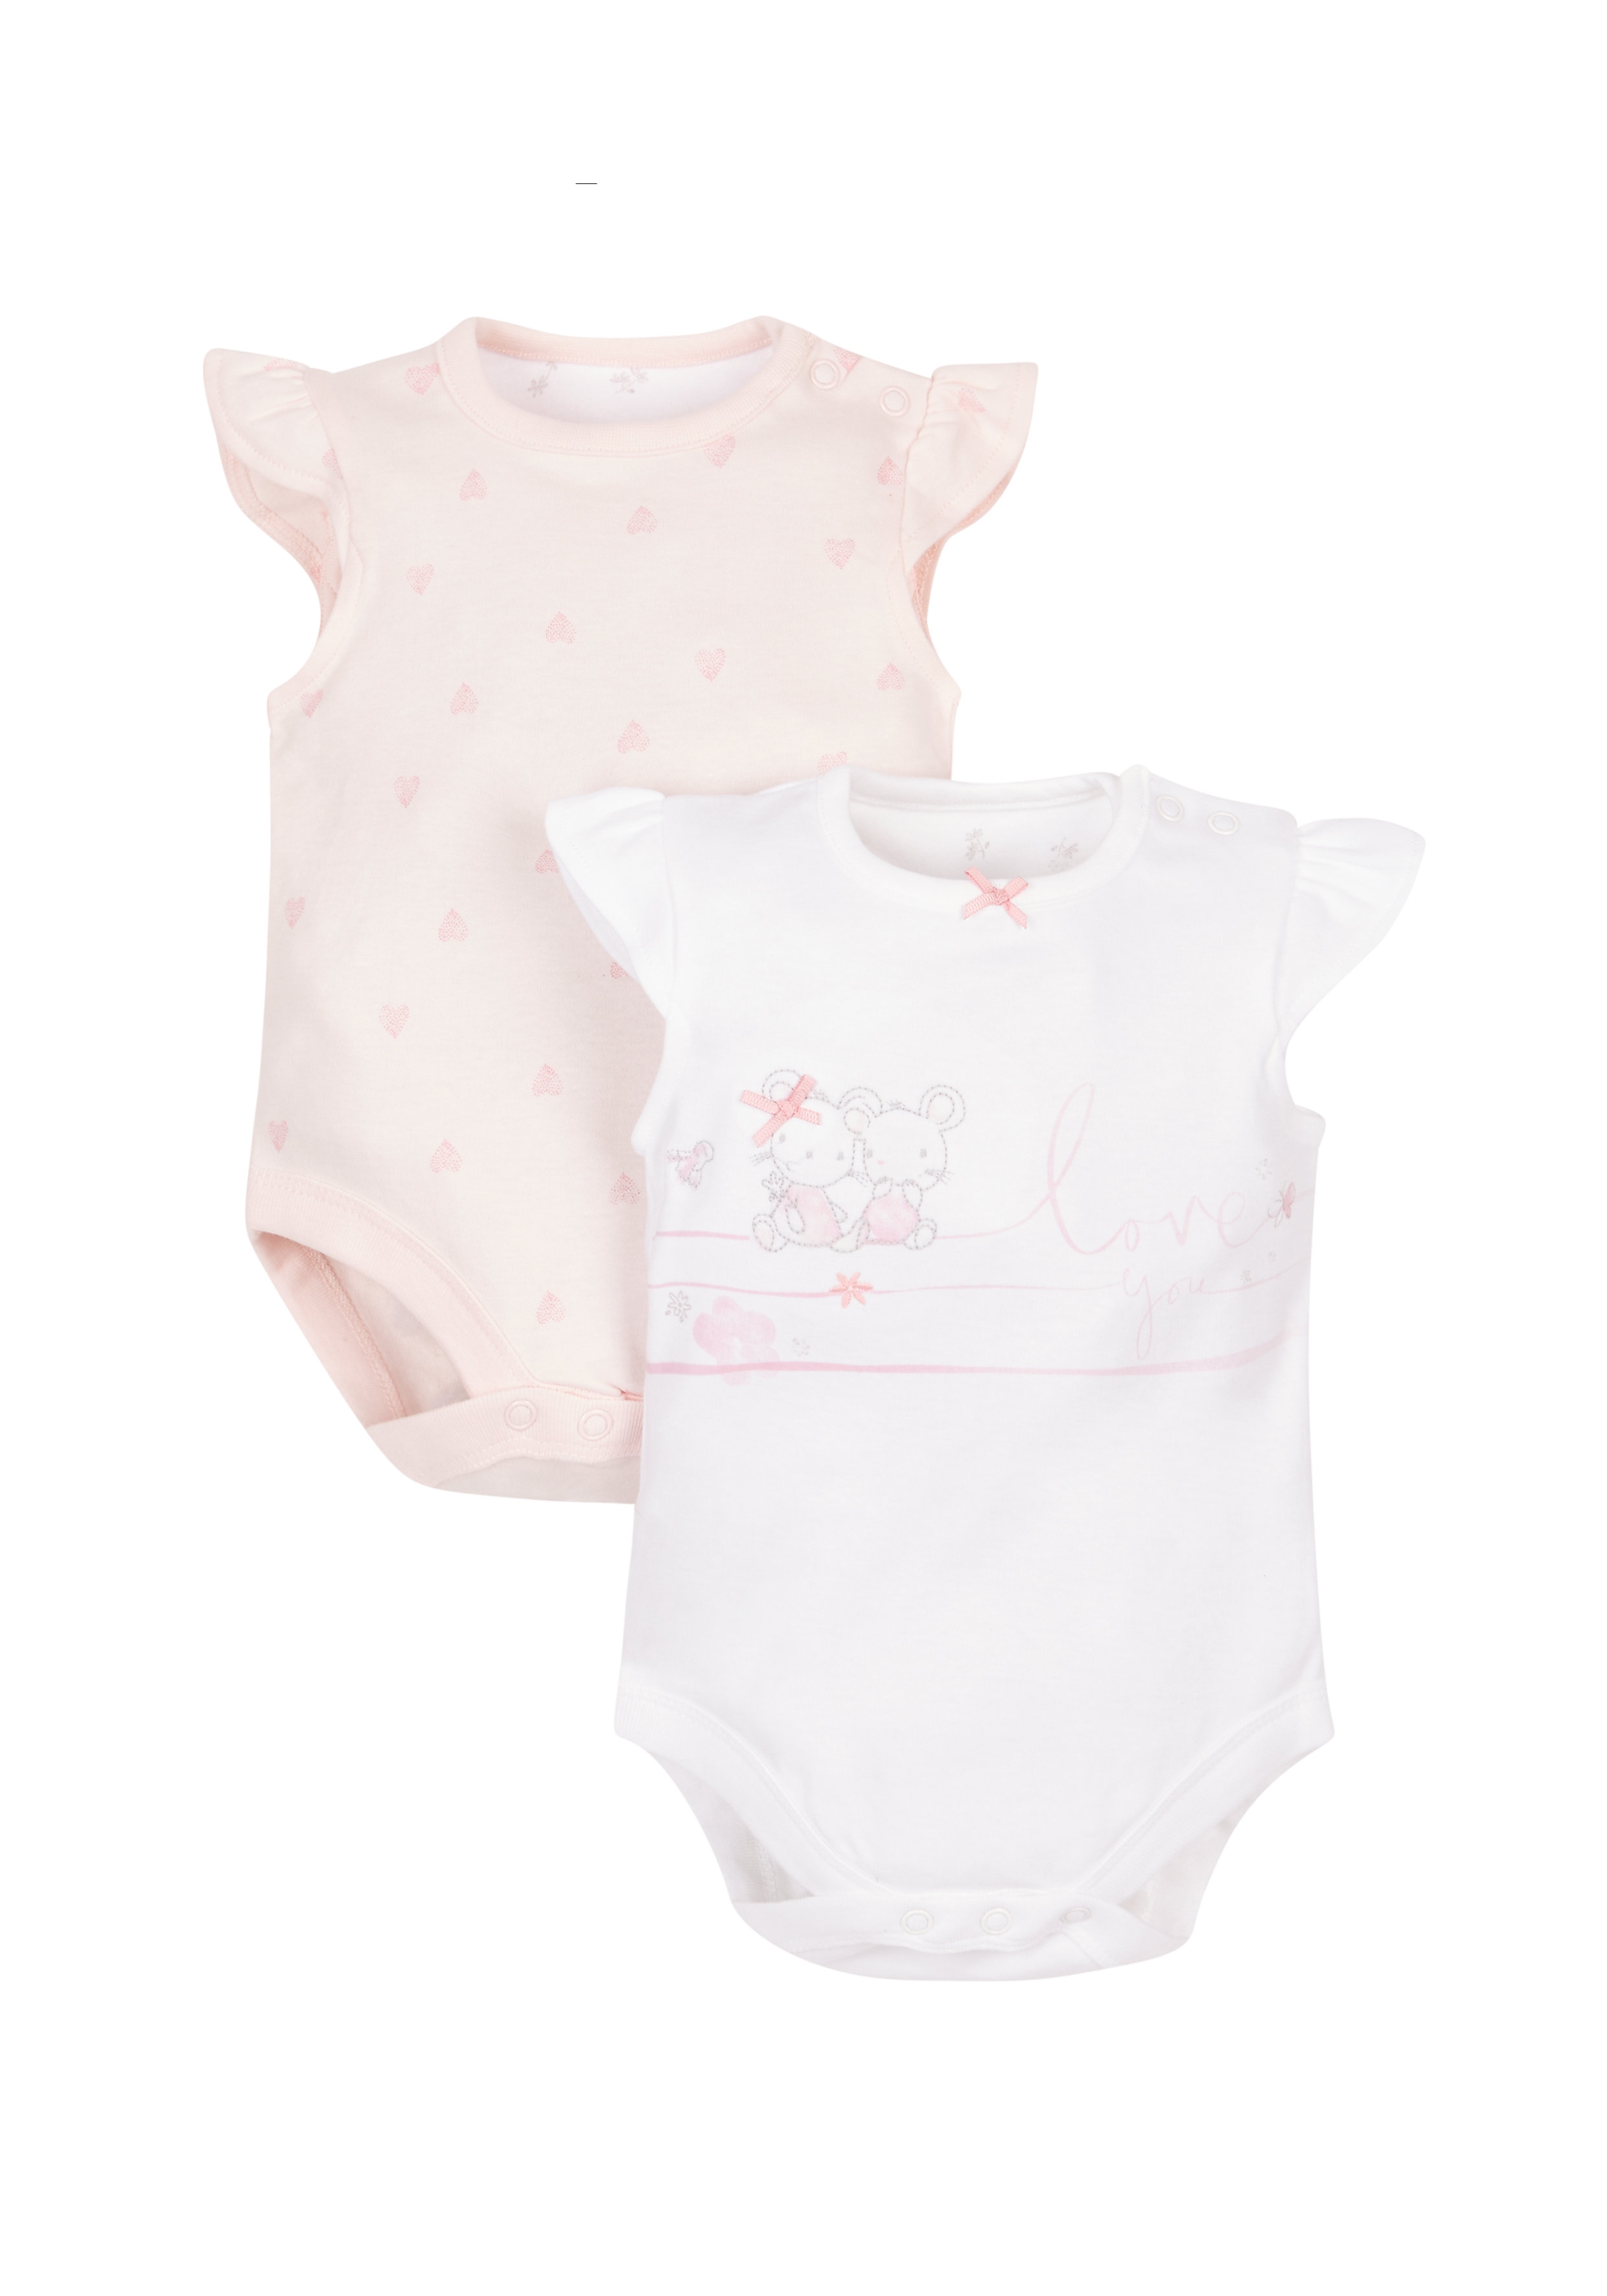 Mothercare | Girls Little Mouse Bodysuits - 2 Pack - Pink